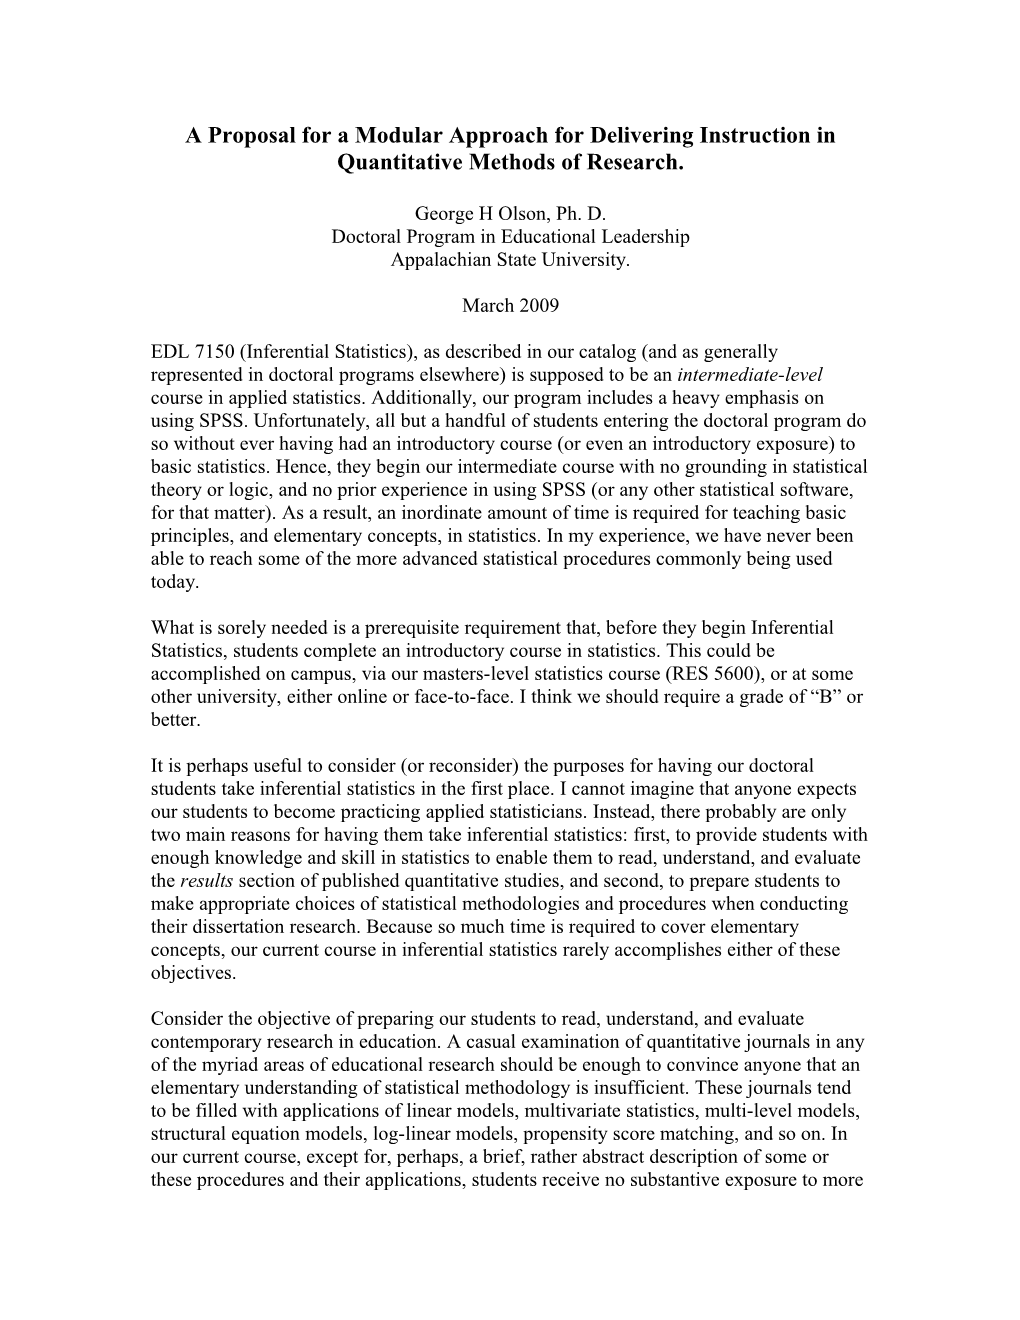 A Proposal for a Modular Approach for Delivering Instruction in Quantitative Methods Of